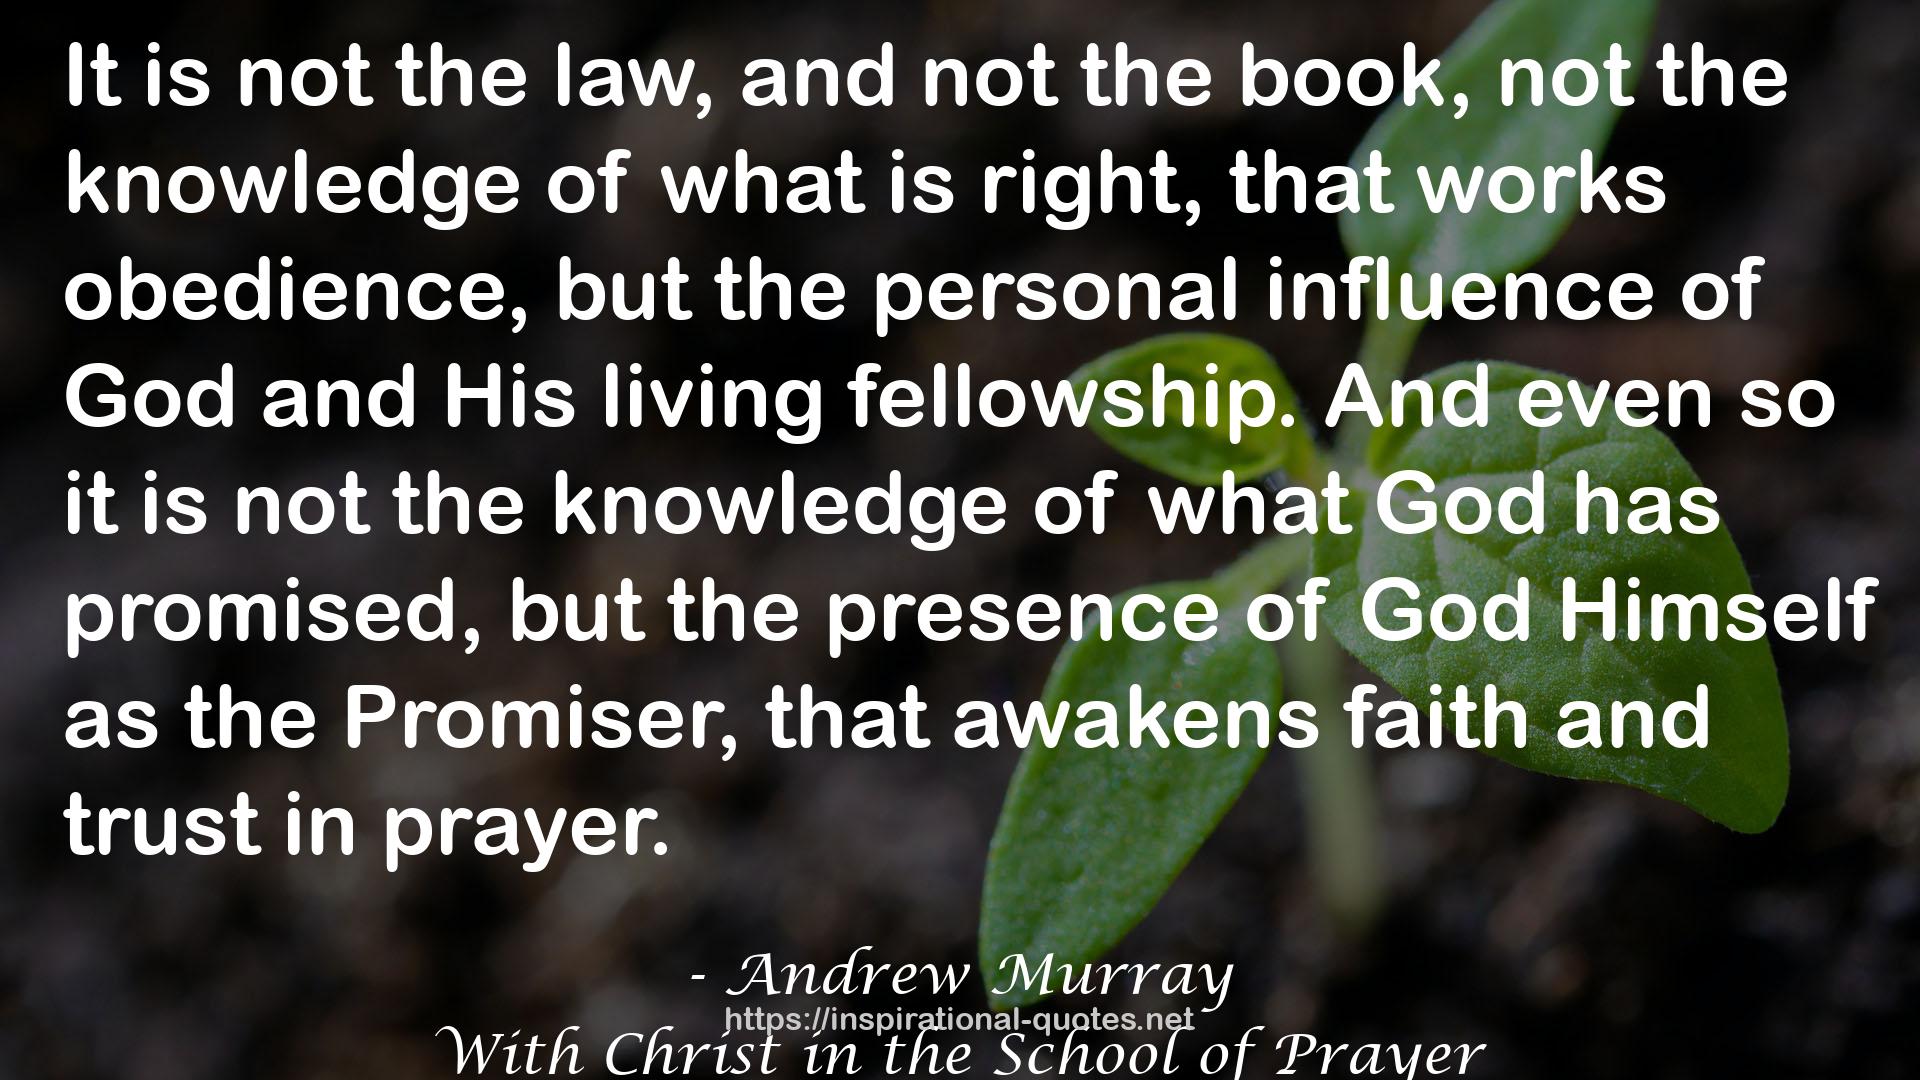 Andrew Murray QUOTES